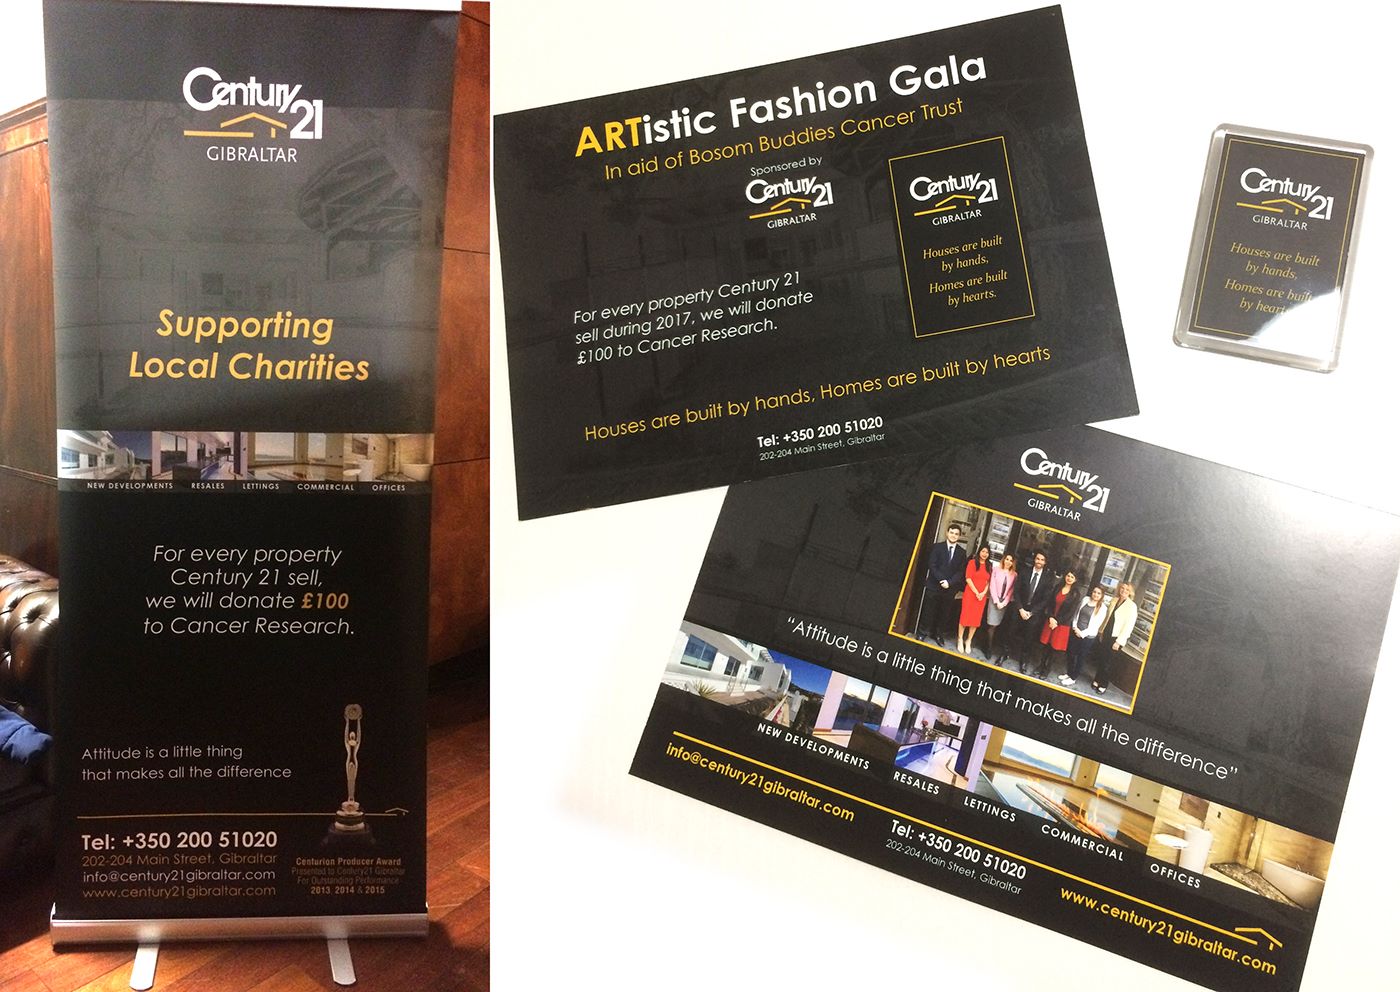 Century 21 (Gibraltar). Advertising material for the Artistic Fashion Gala held in 2017.
